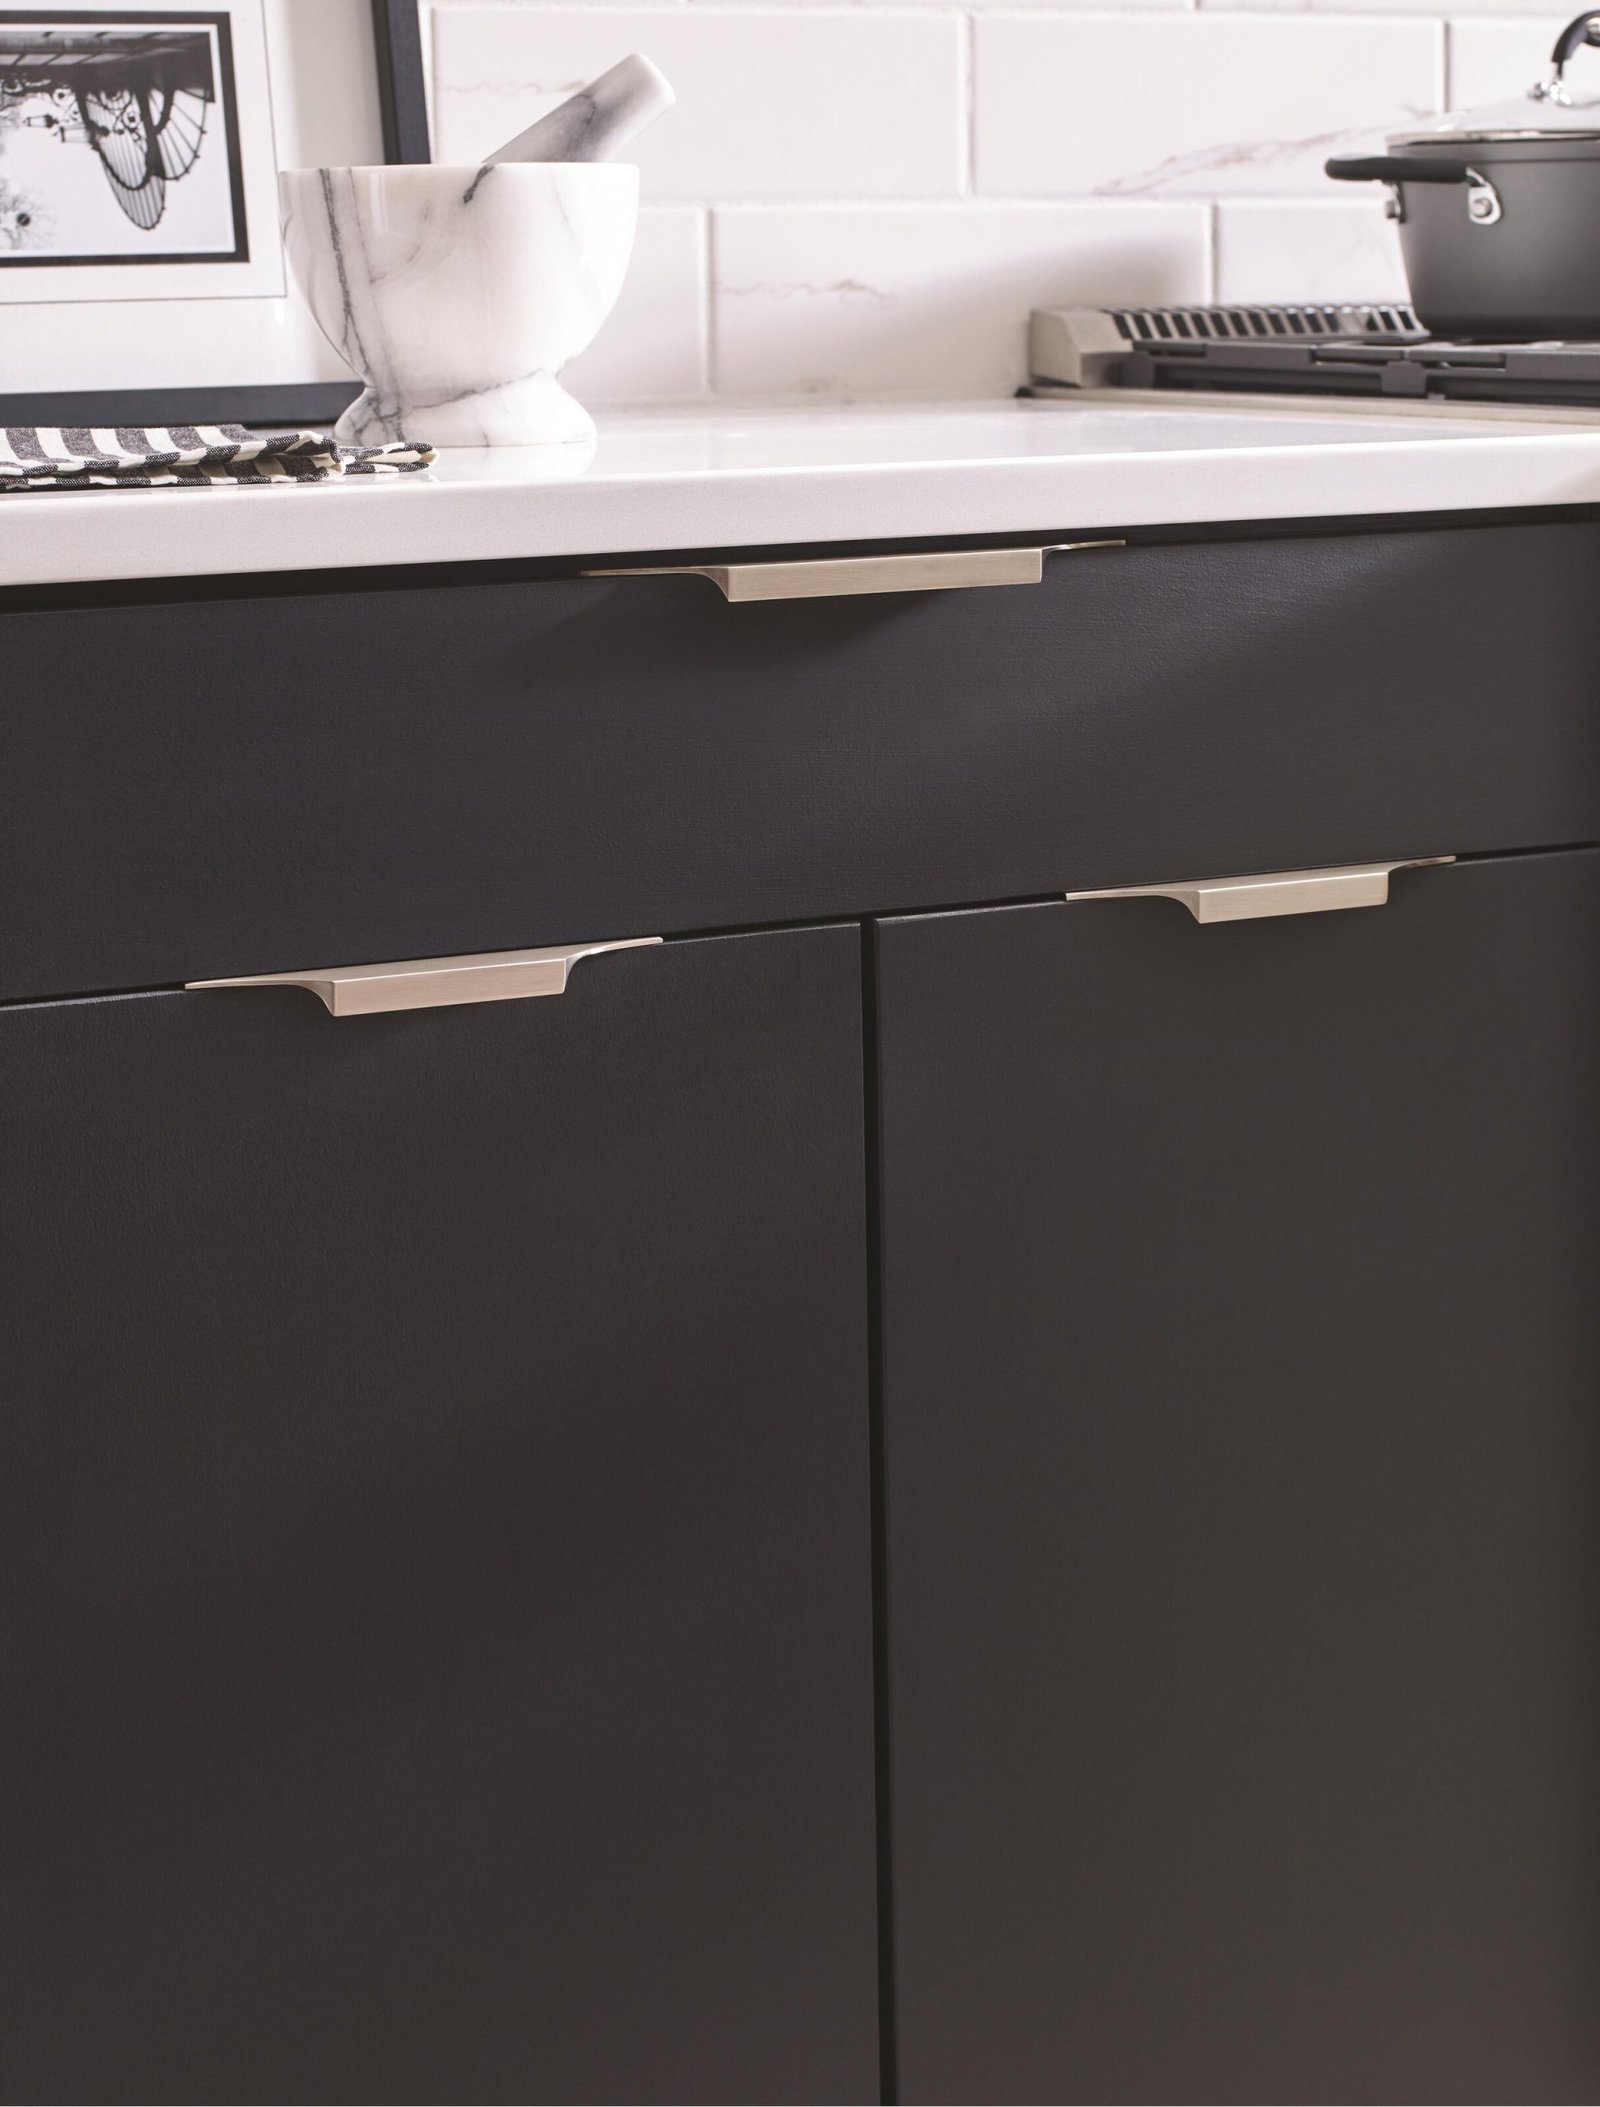 Accent Your Cabinets with Satin Nickel